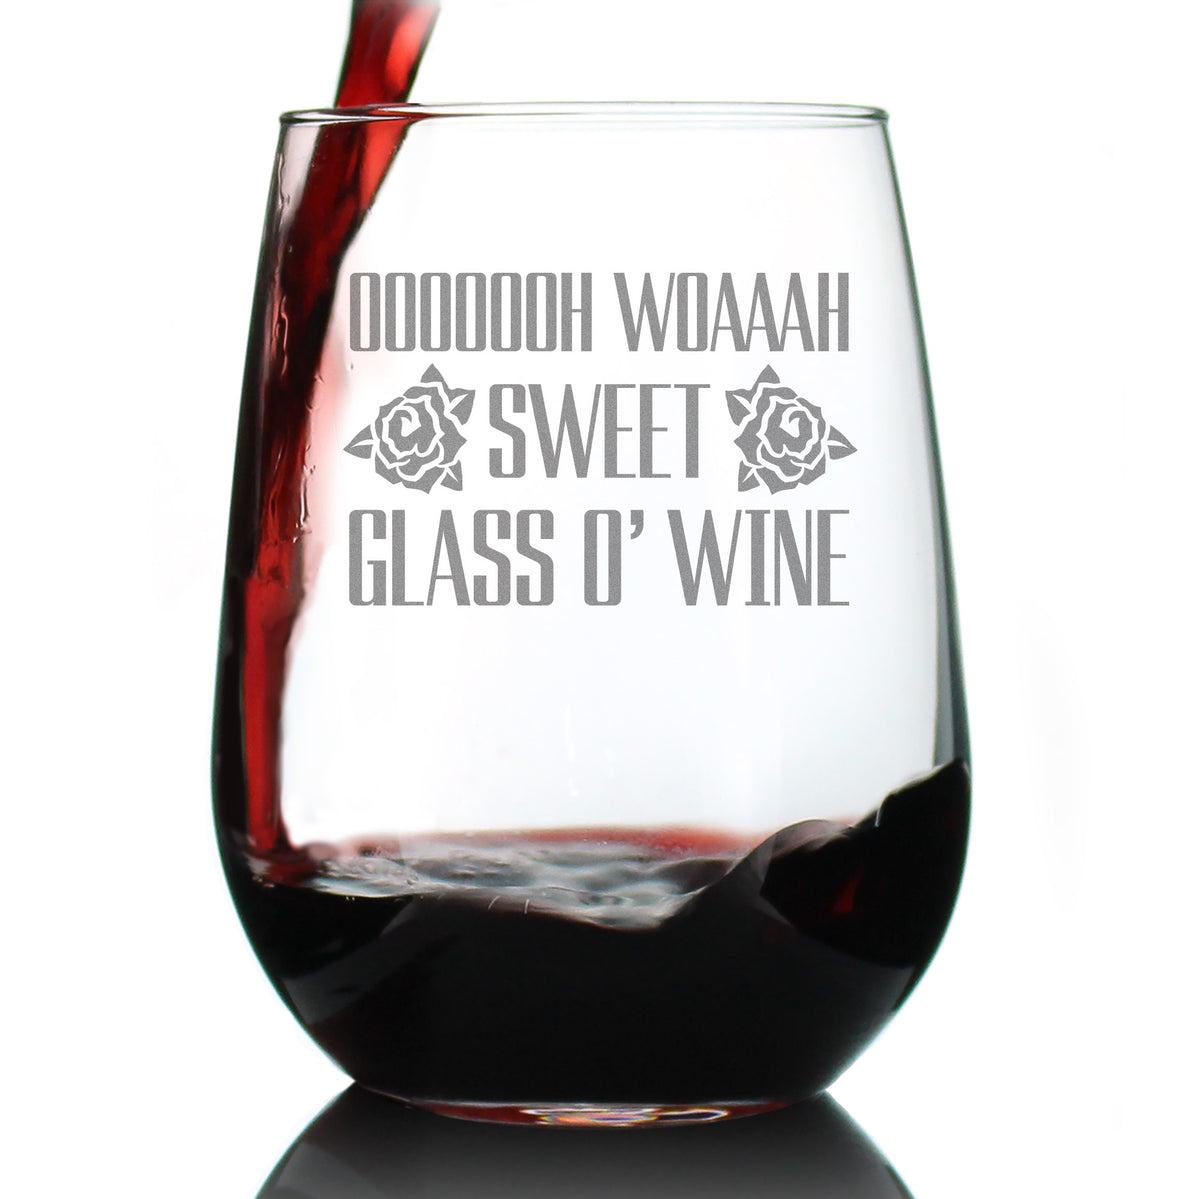 Sweet Glass O’ Wine – Cute Funny Stemless Wine Glass, Large 17 Ounces, Etched Sayings, Gift Box